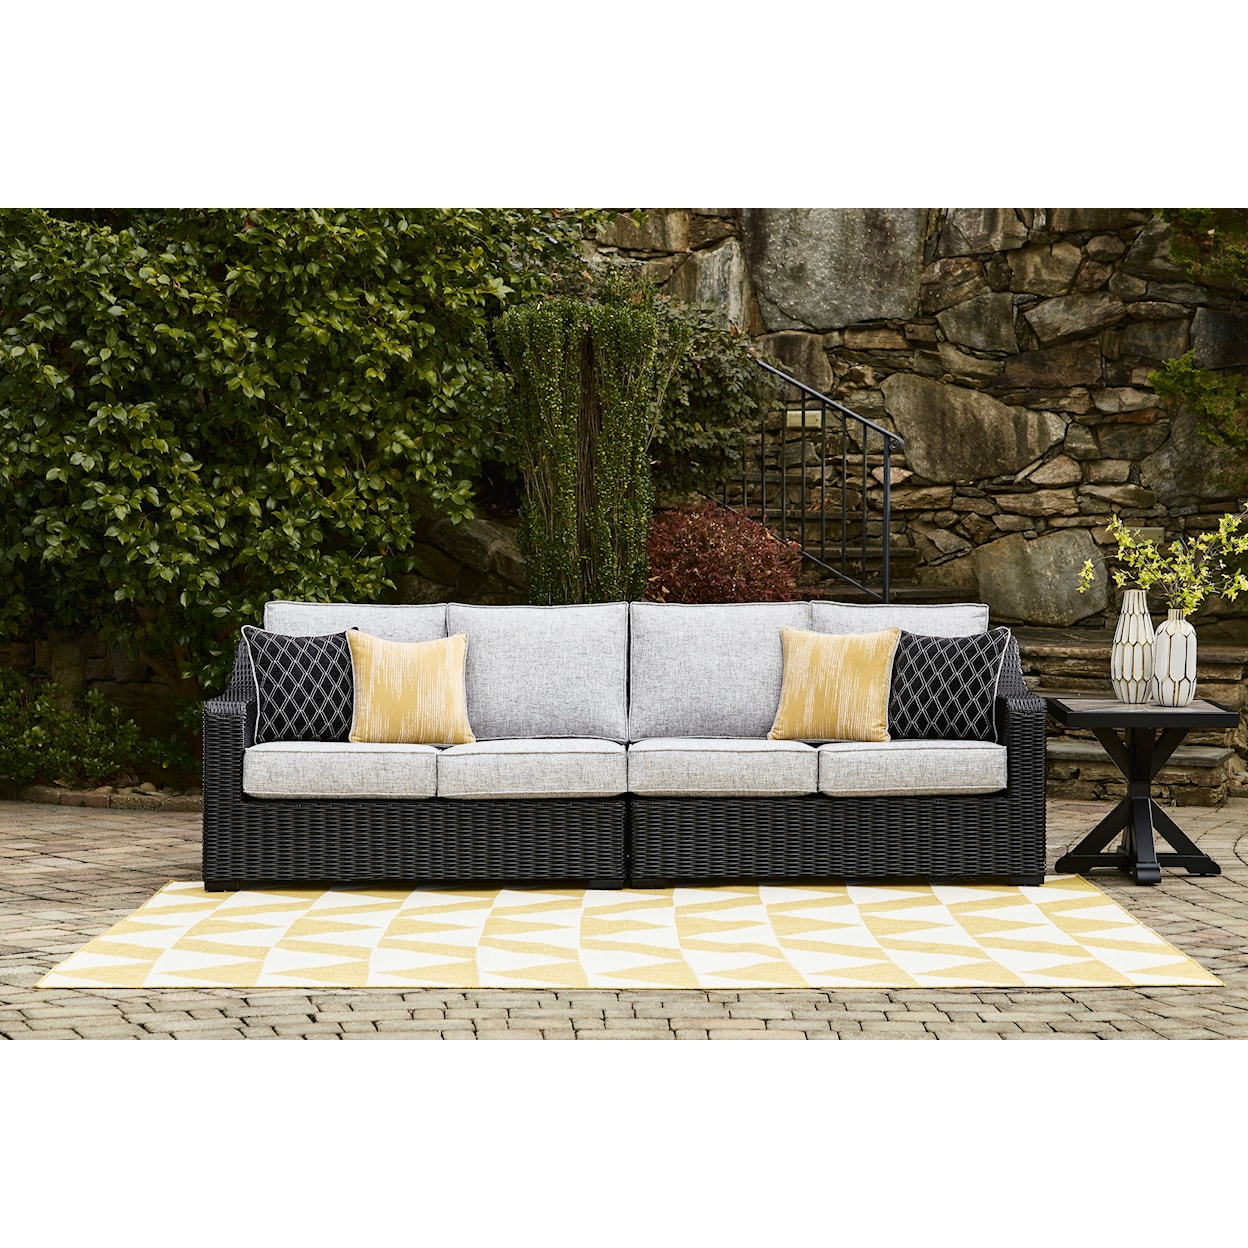 Michael Alan Select Beachcroft 2-Piece Outdoor Loveseat With Cushion